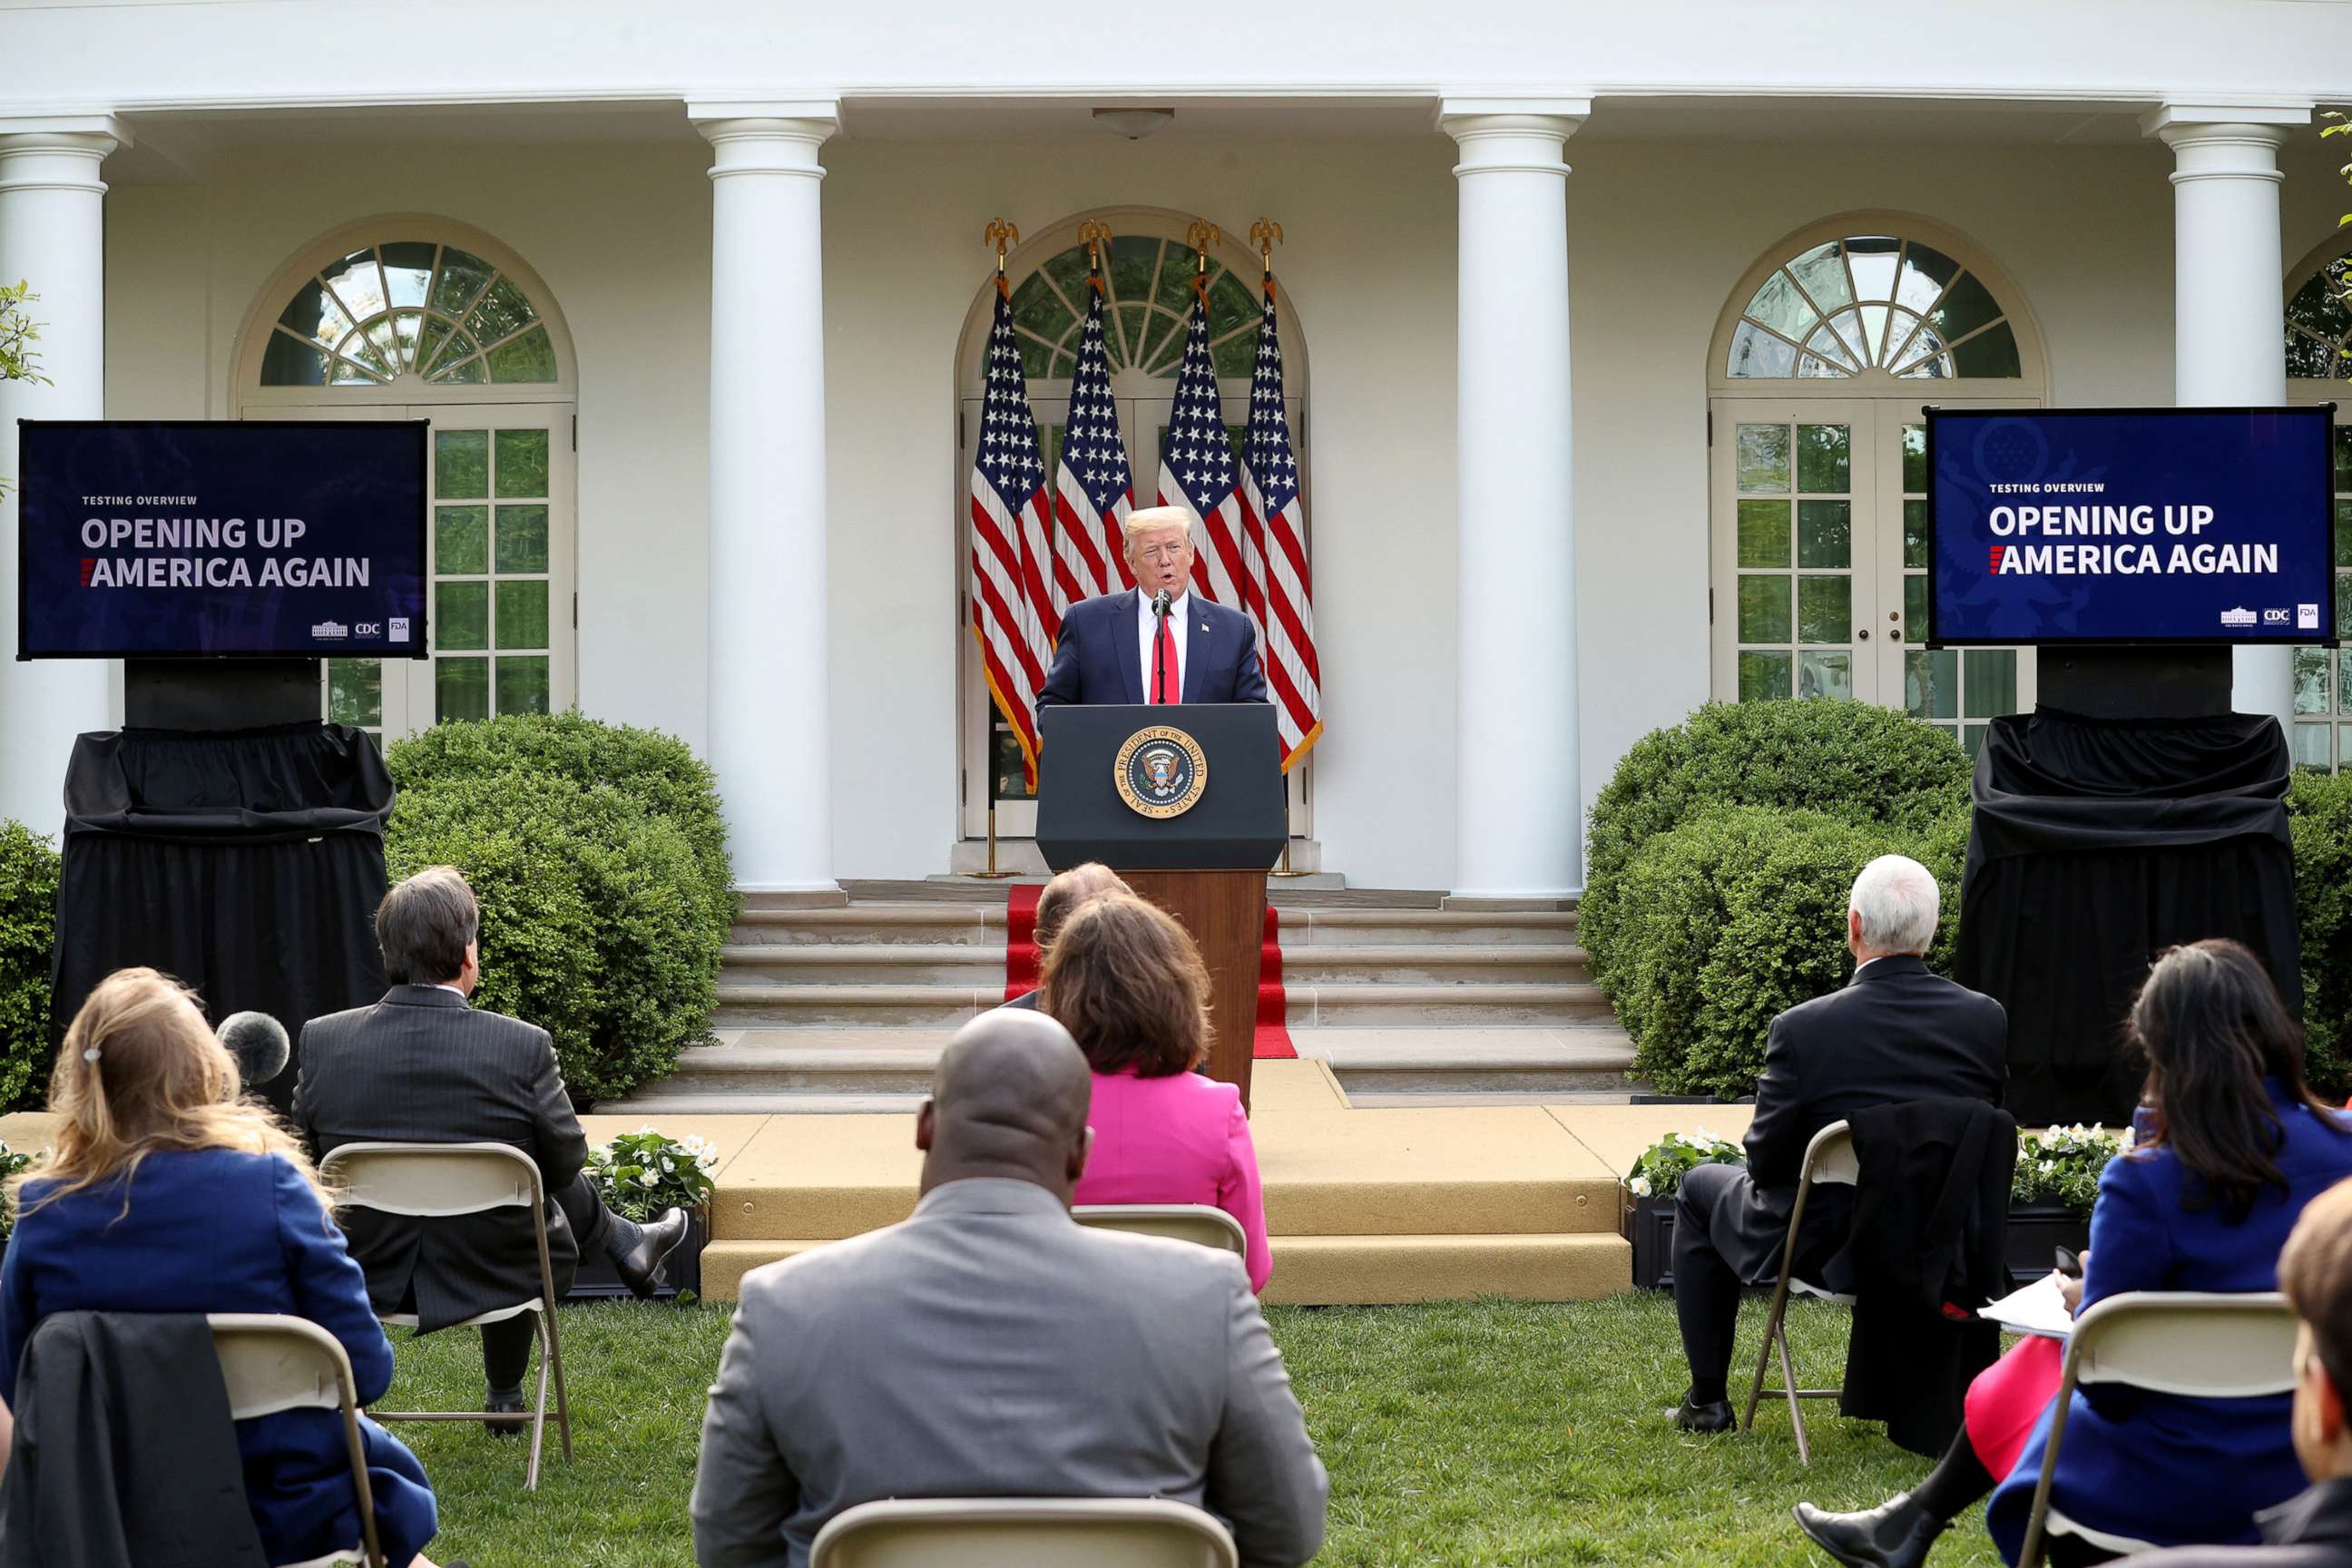 PHOTO: President Donald Trump speaks during the daily briefing of the coronavirus task force in the Rose Garden at the White House on April 27, 2020 in Washington, D.C.